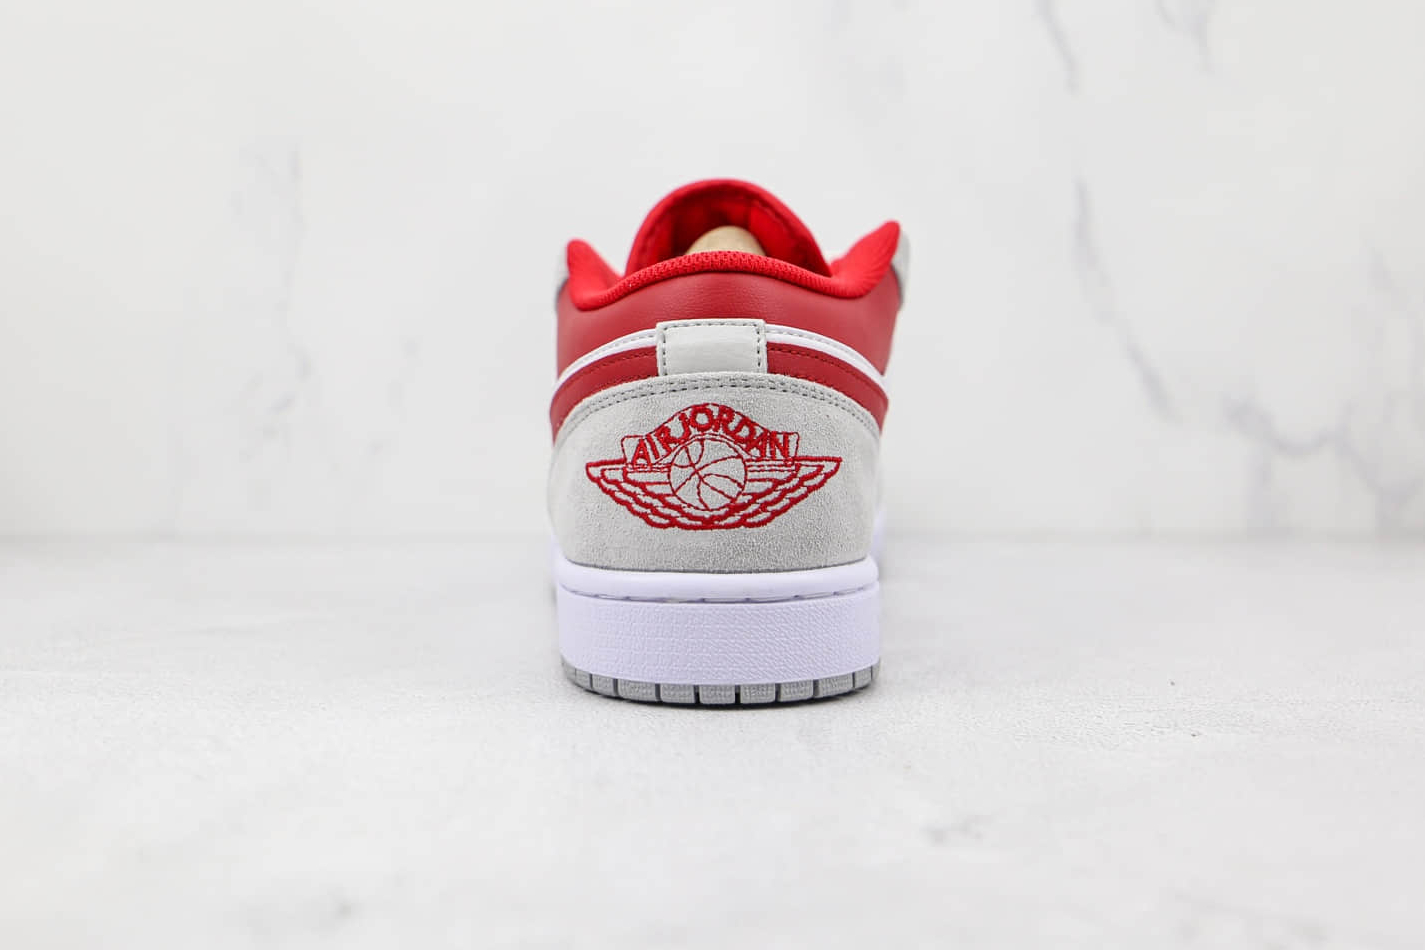 Air Jordan 1 Low SE 'Light Smoke Grey Gym Red' DC6991-016 - Stylish and Iconic Sneakers